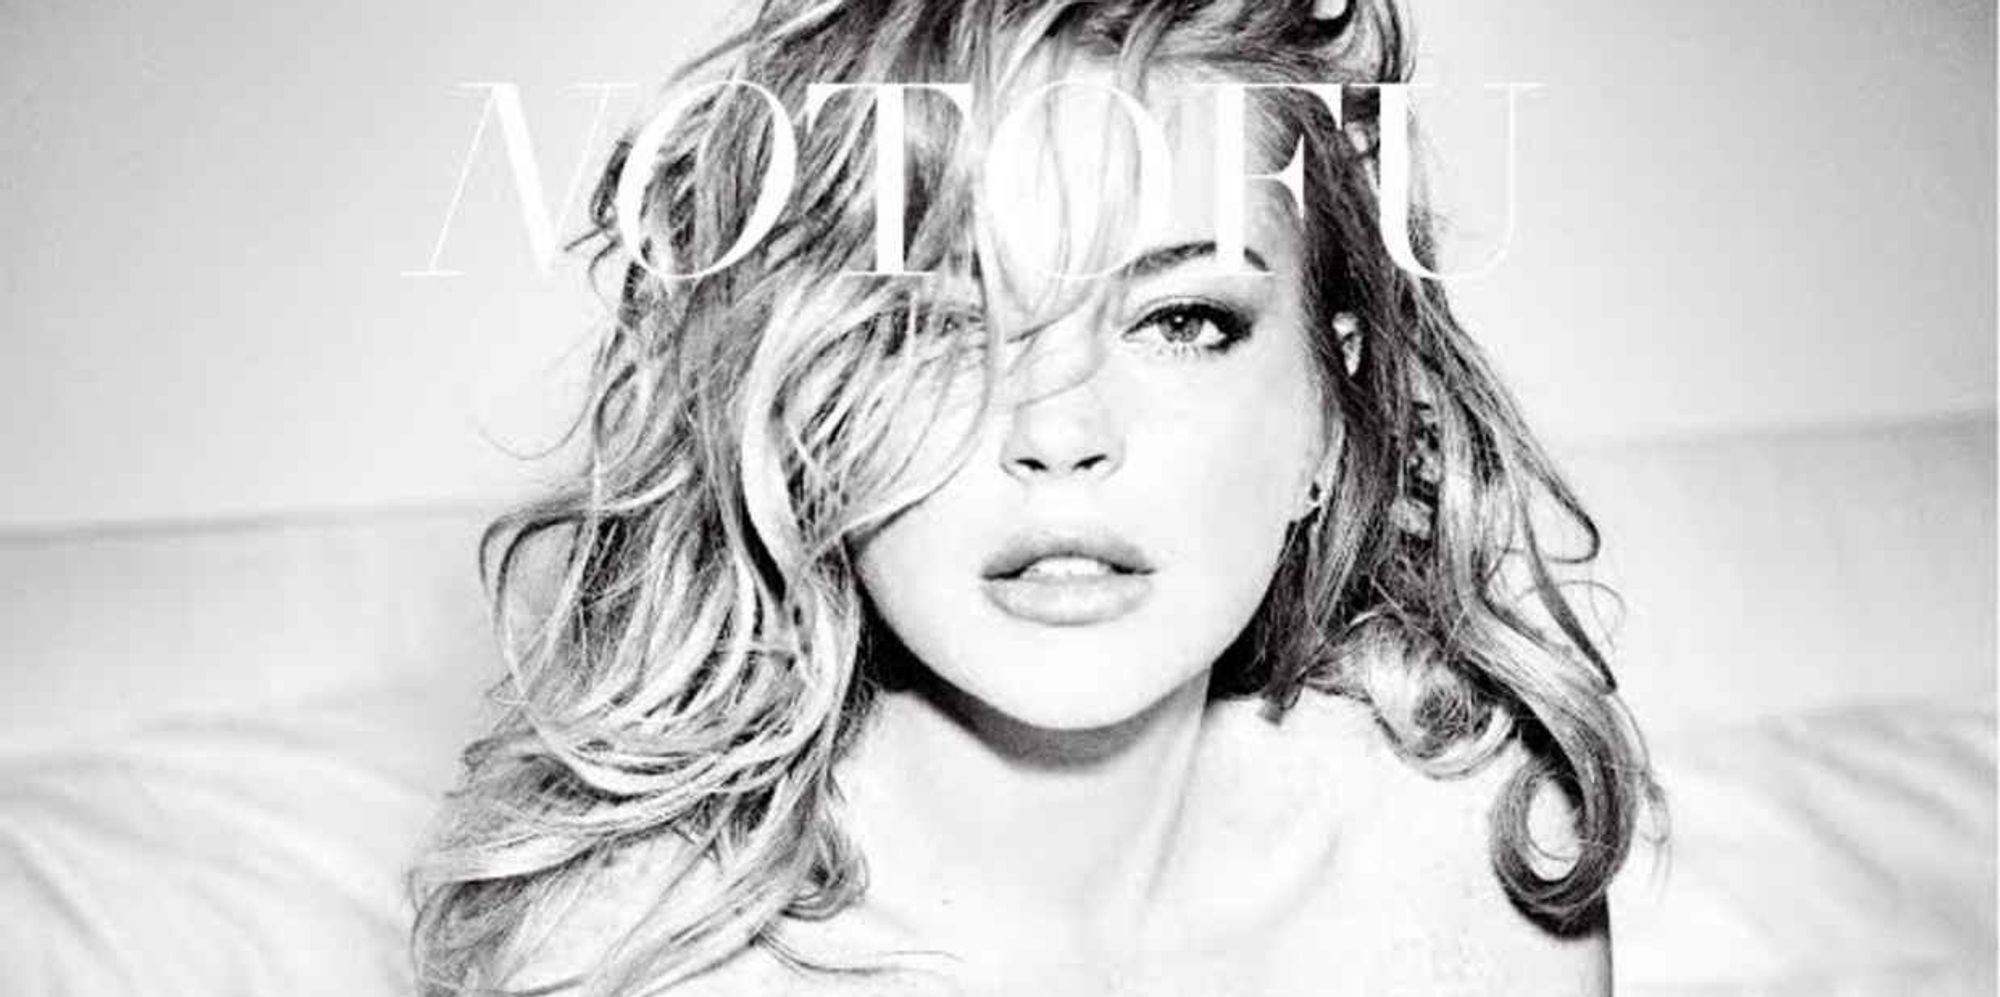 Lindsay Lohan Poses Nude In Bed For No Tofu Magazine Cover 